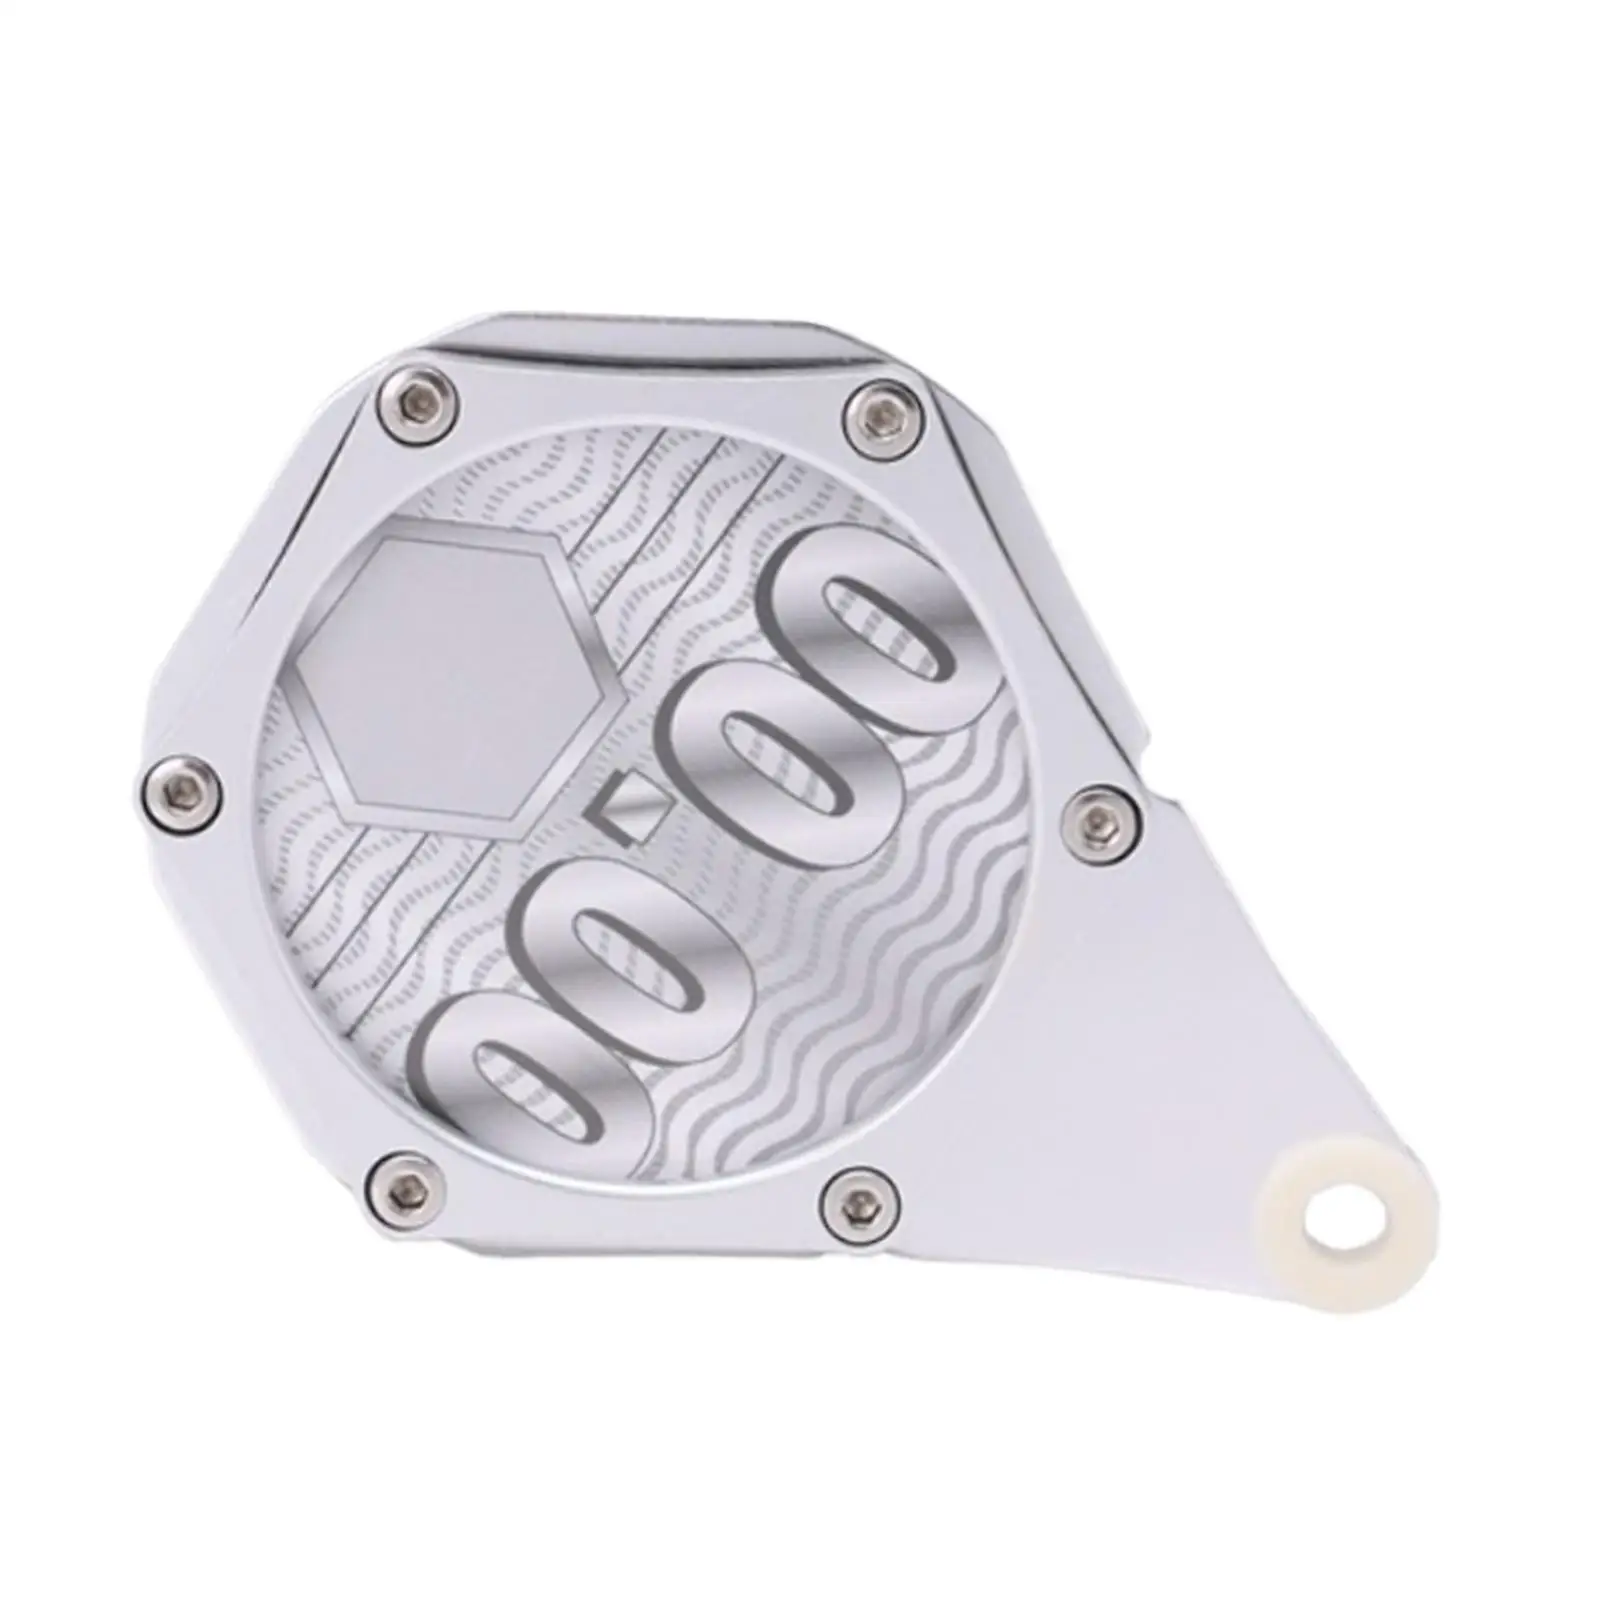 Tax Disc Plate Compact Motorbike Tax Disc Holder for Scooter Motorcycle Durable